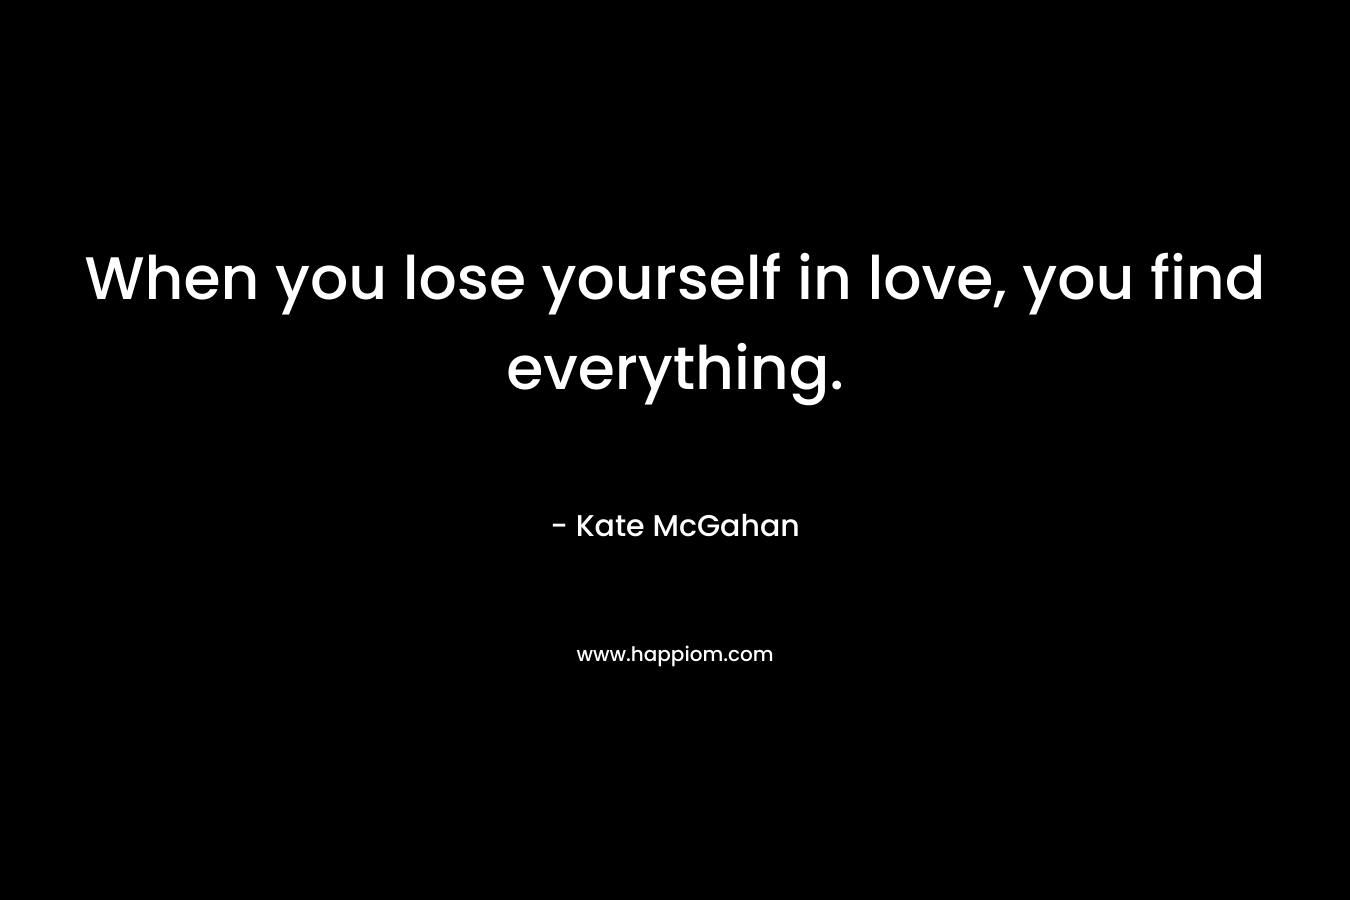 When you lose yourself in love, you find everything. – Kate McGahan